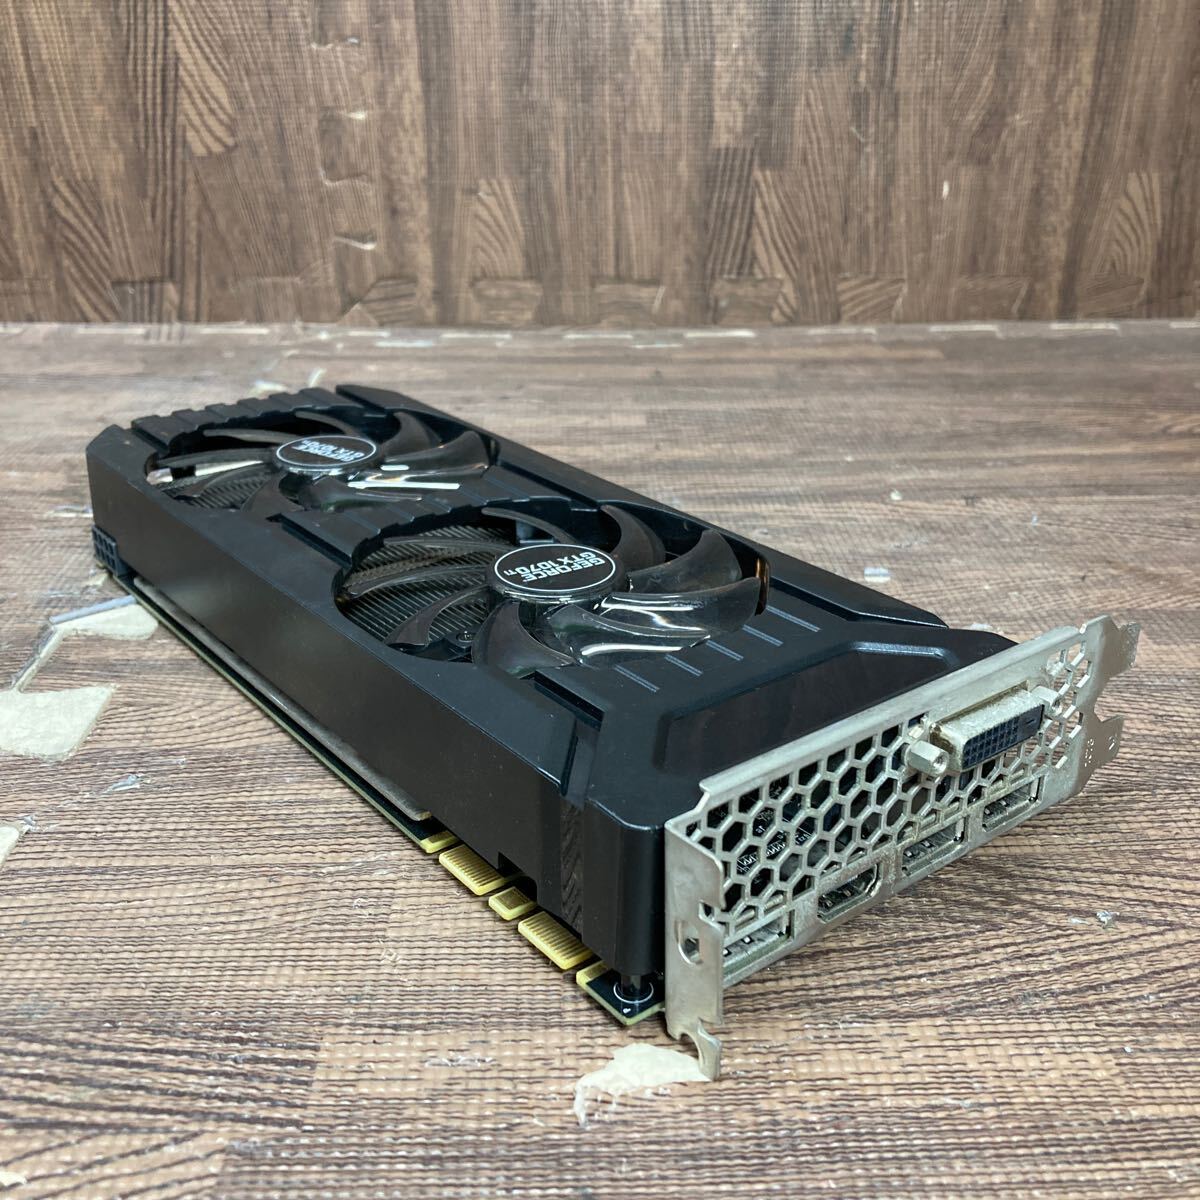 GK super-discount GB-232 graphics board PALIT NVIDIA GeForce GTX1070Ti DUAL 8G GDDR5 256bit awareness. image output only verification secondhand goods including in a package possibility 